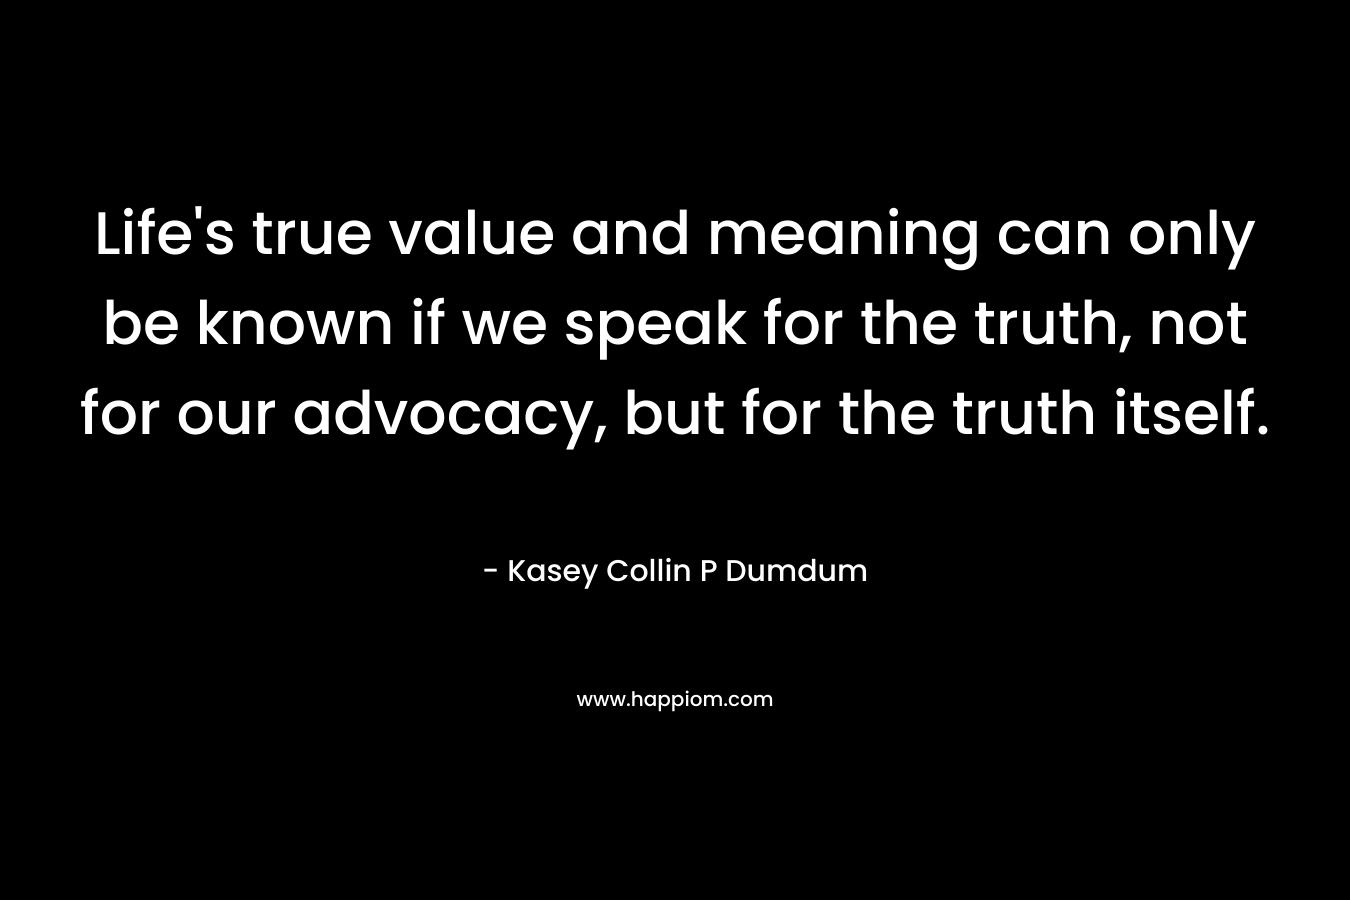 Life's true value and meaning can only be known if we speak for the truth, not for our advocacy, but for the truth itself.